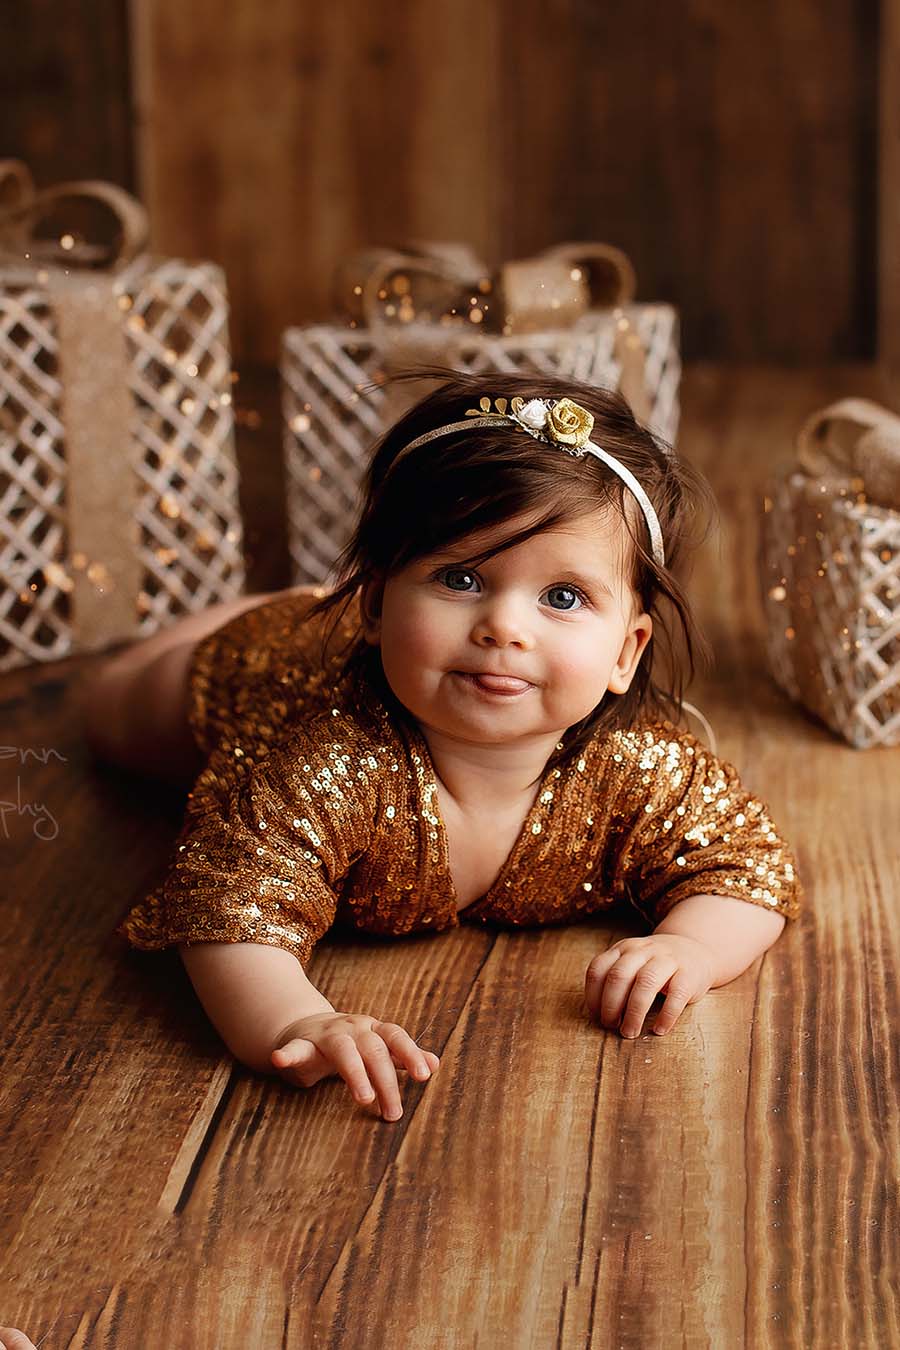 A baby girl is laying on the ground. There are little golden present in the background. The babygirl is wearing a gold romper with sequins. The girl is looking to the camera and has a little smile.